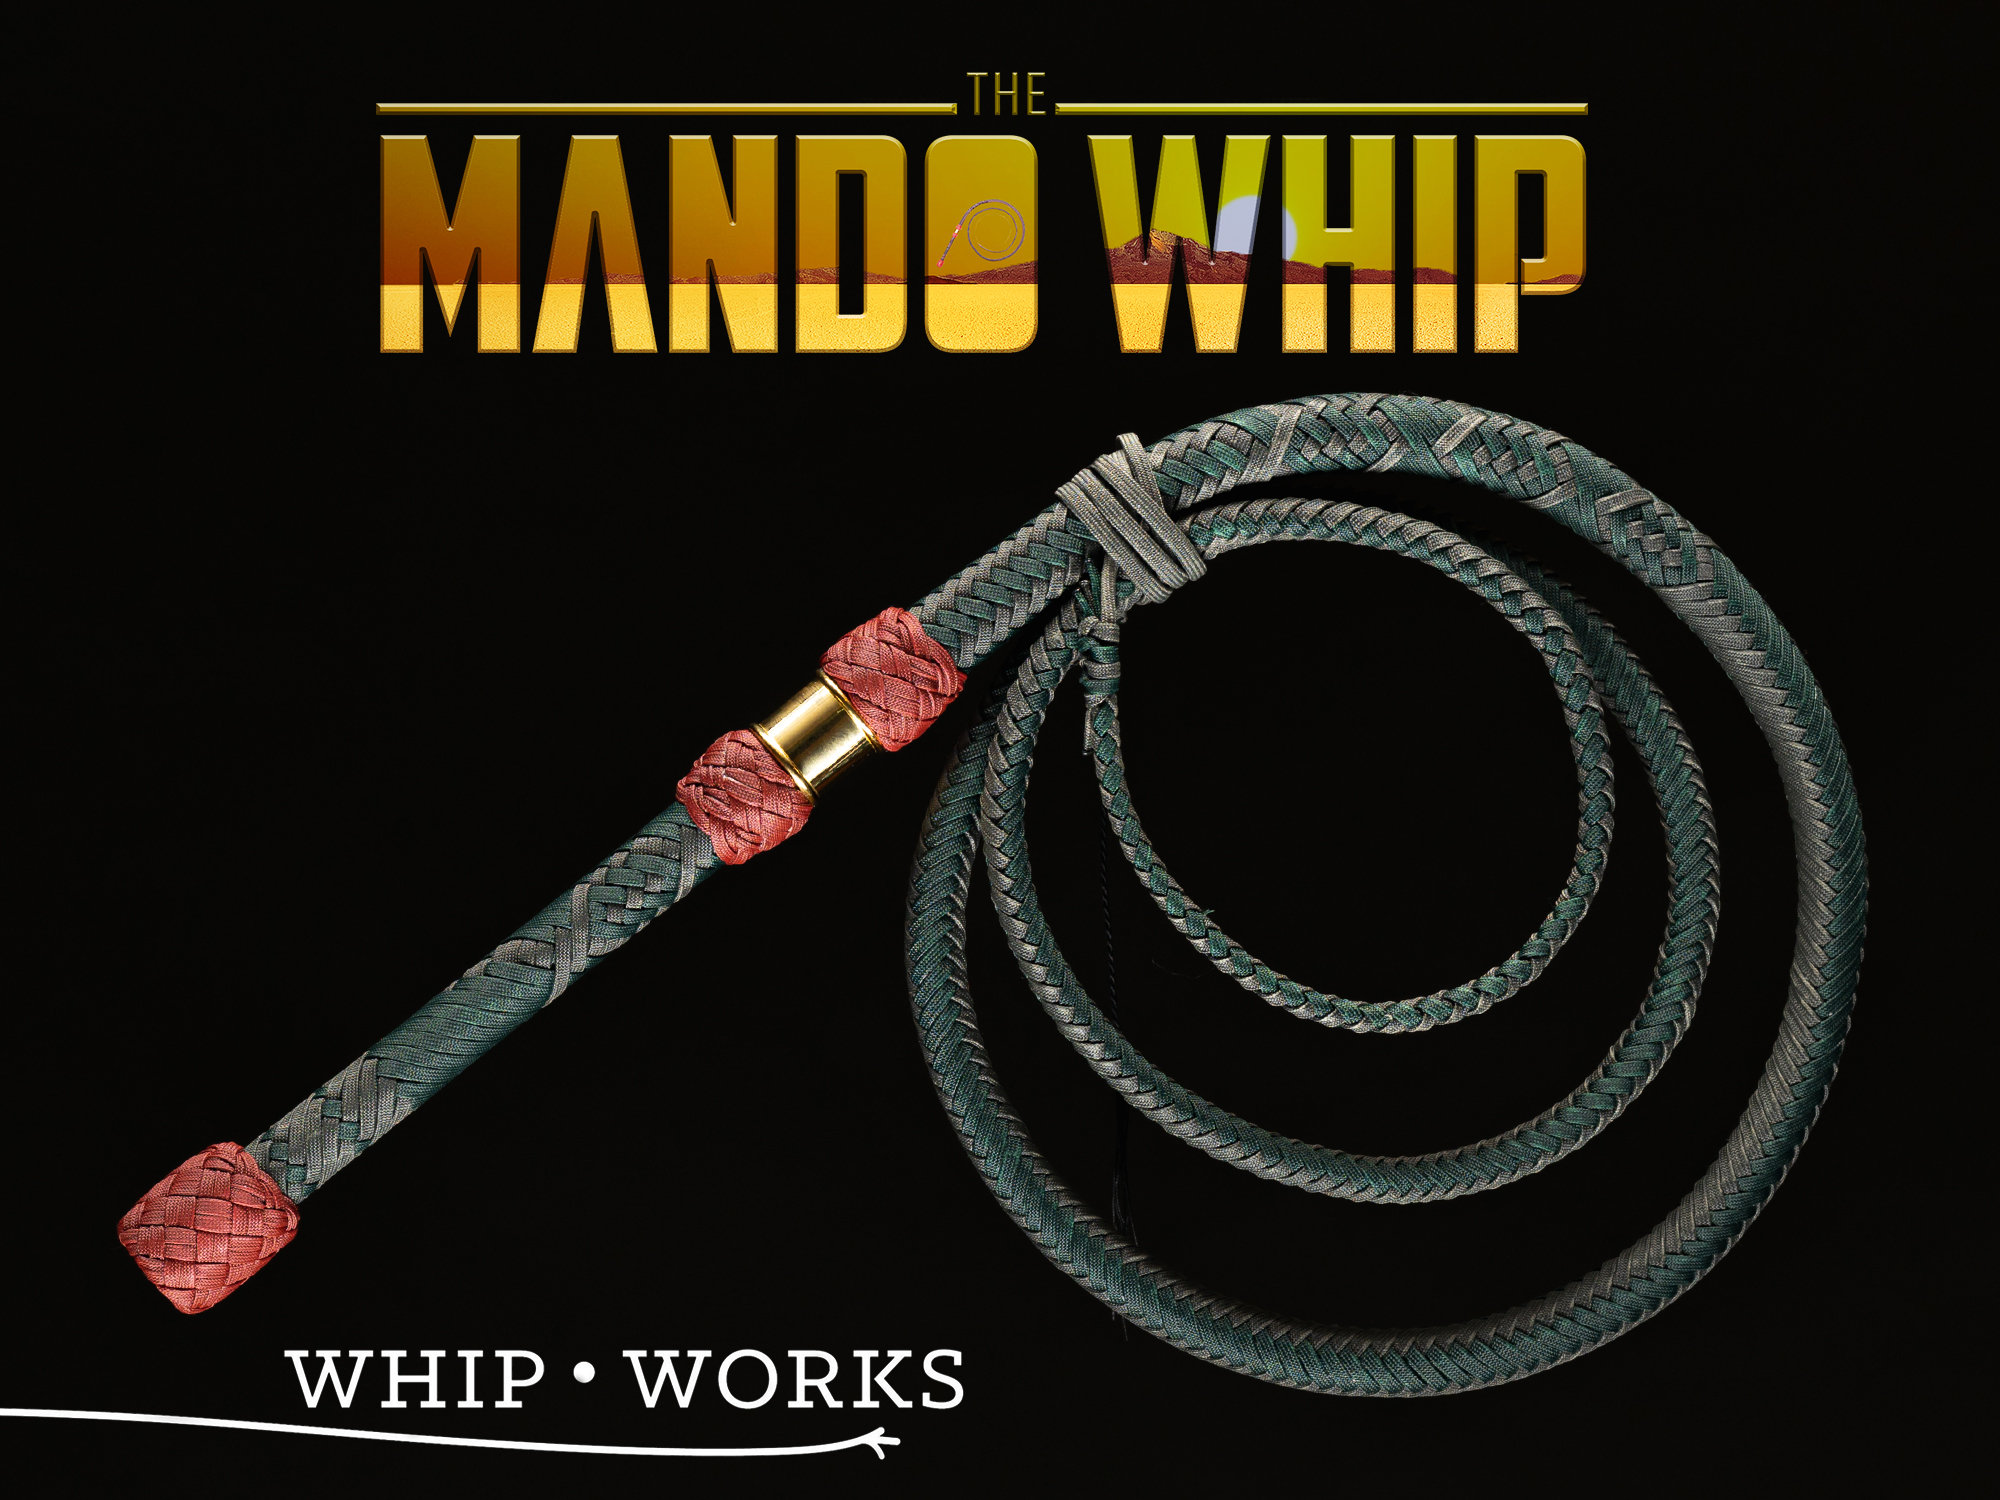 The Mando Whip, a Paracord Bullwhip Inspired by Boba Fett From Star Wars 